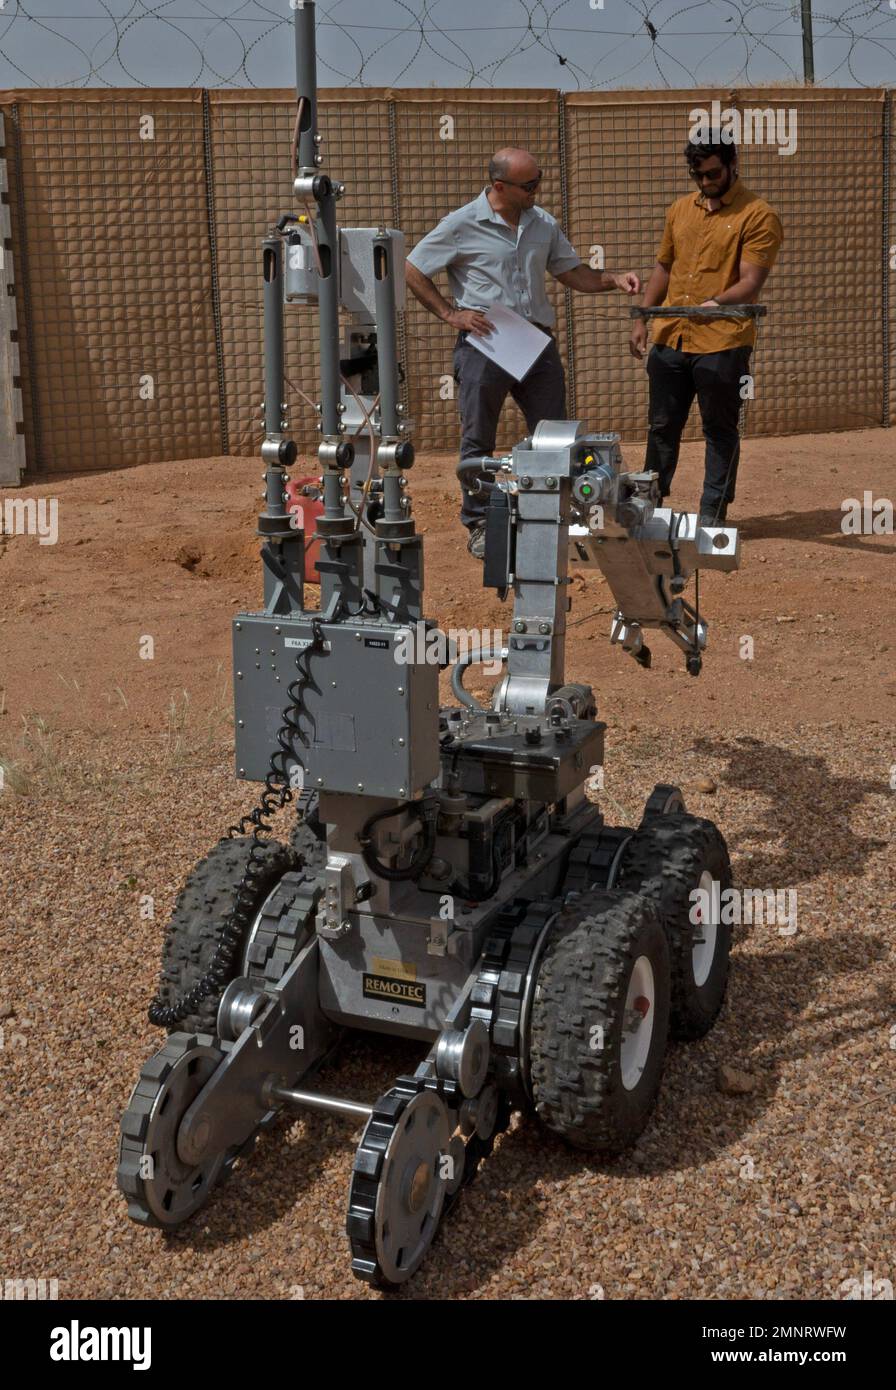 AIR BASE 201, Niger - U.S. Congressman Jimmy Panetta receives a  demonstration of an Explosive Ordnance Disposal military robot during his  site tour at Air Base 201, Niger, Oct. 5, 2022. The